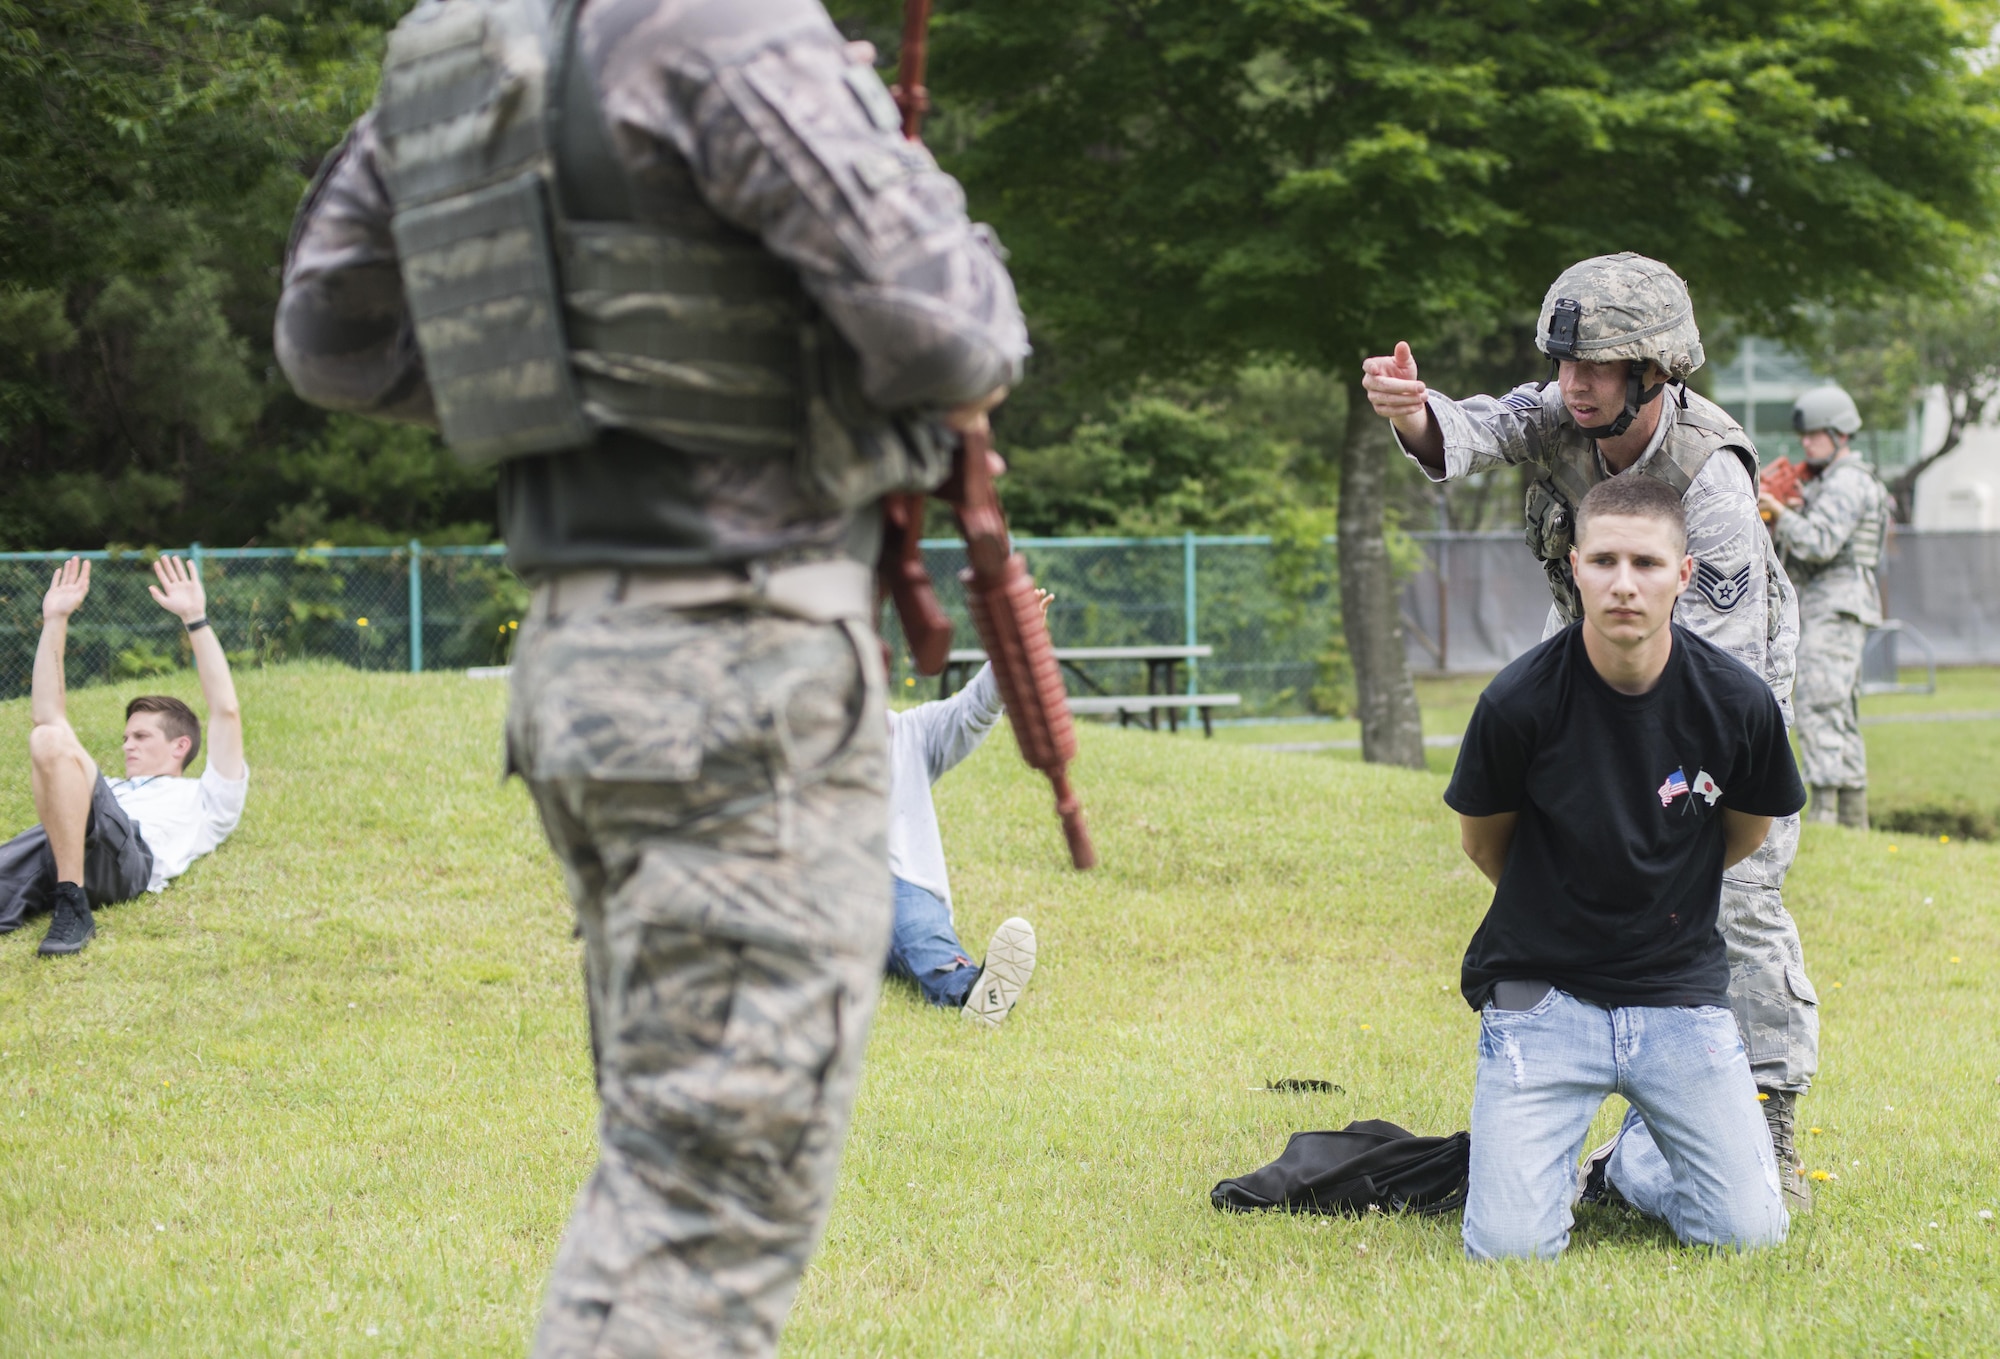 U.S. Air Force Reserve Staff Sgt. Mitchell Melot, a fire team member with the 507th Security Forces Squadron, apprehends a suspect during the Beverly Sunrise 16-05 active shooter exercise held July 29, 2016, at Misawa Air Base, Japan. The 35th Fighter Wing performs these training exercises bi-annually in order to ensure all Misawa personnel know how to properly respond in such a situation. (U.S. Air Force photo by Senior Airman Brittany A. Chase)